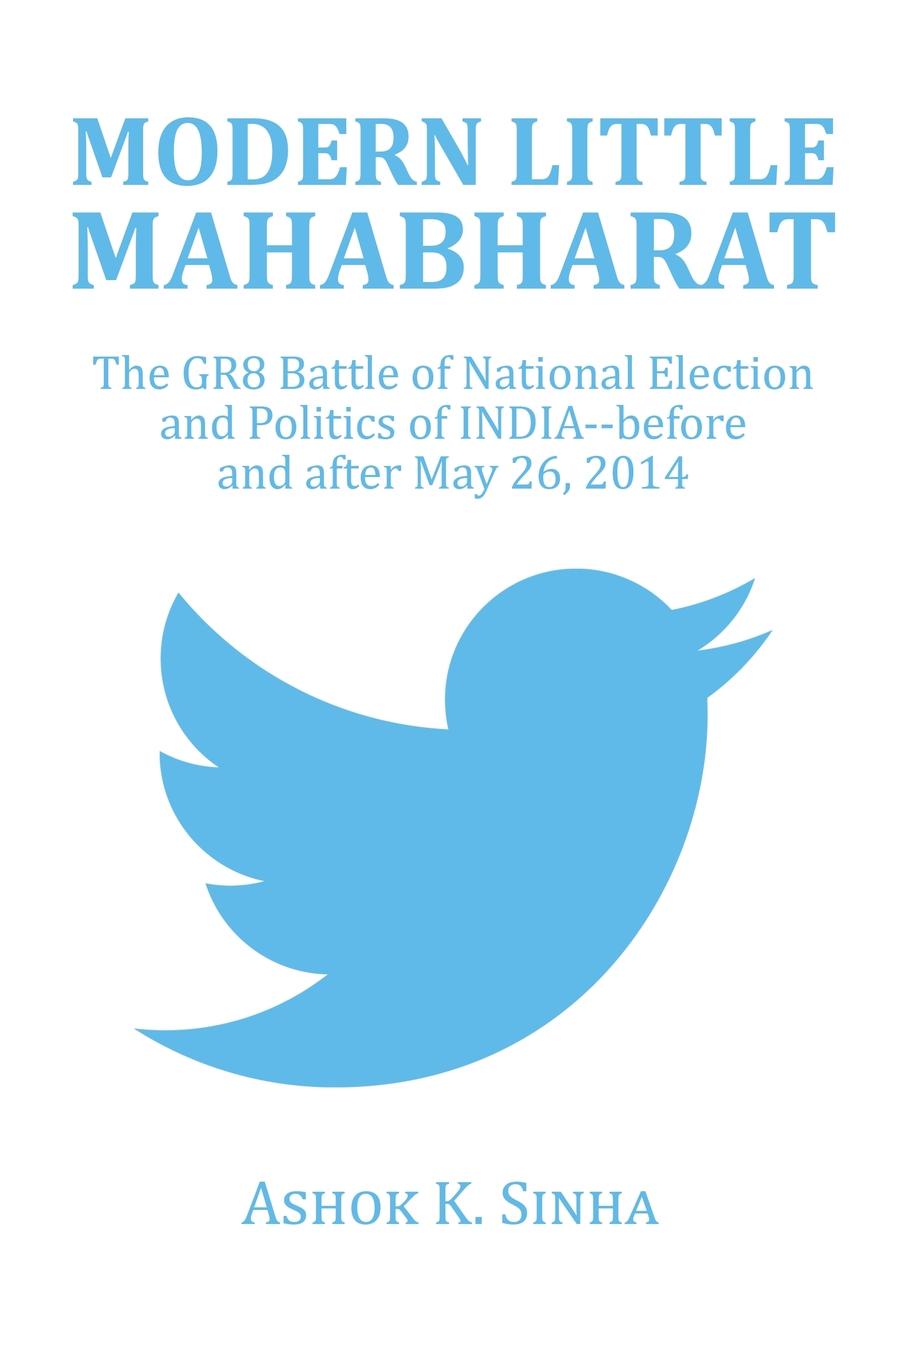 MODERN LITTLE MAHABHARAT. The GR8 Battle of National Election and Politics of INDIA--before and after May 26, 2014